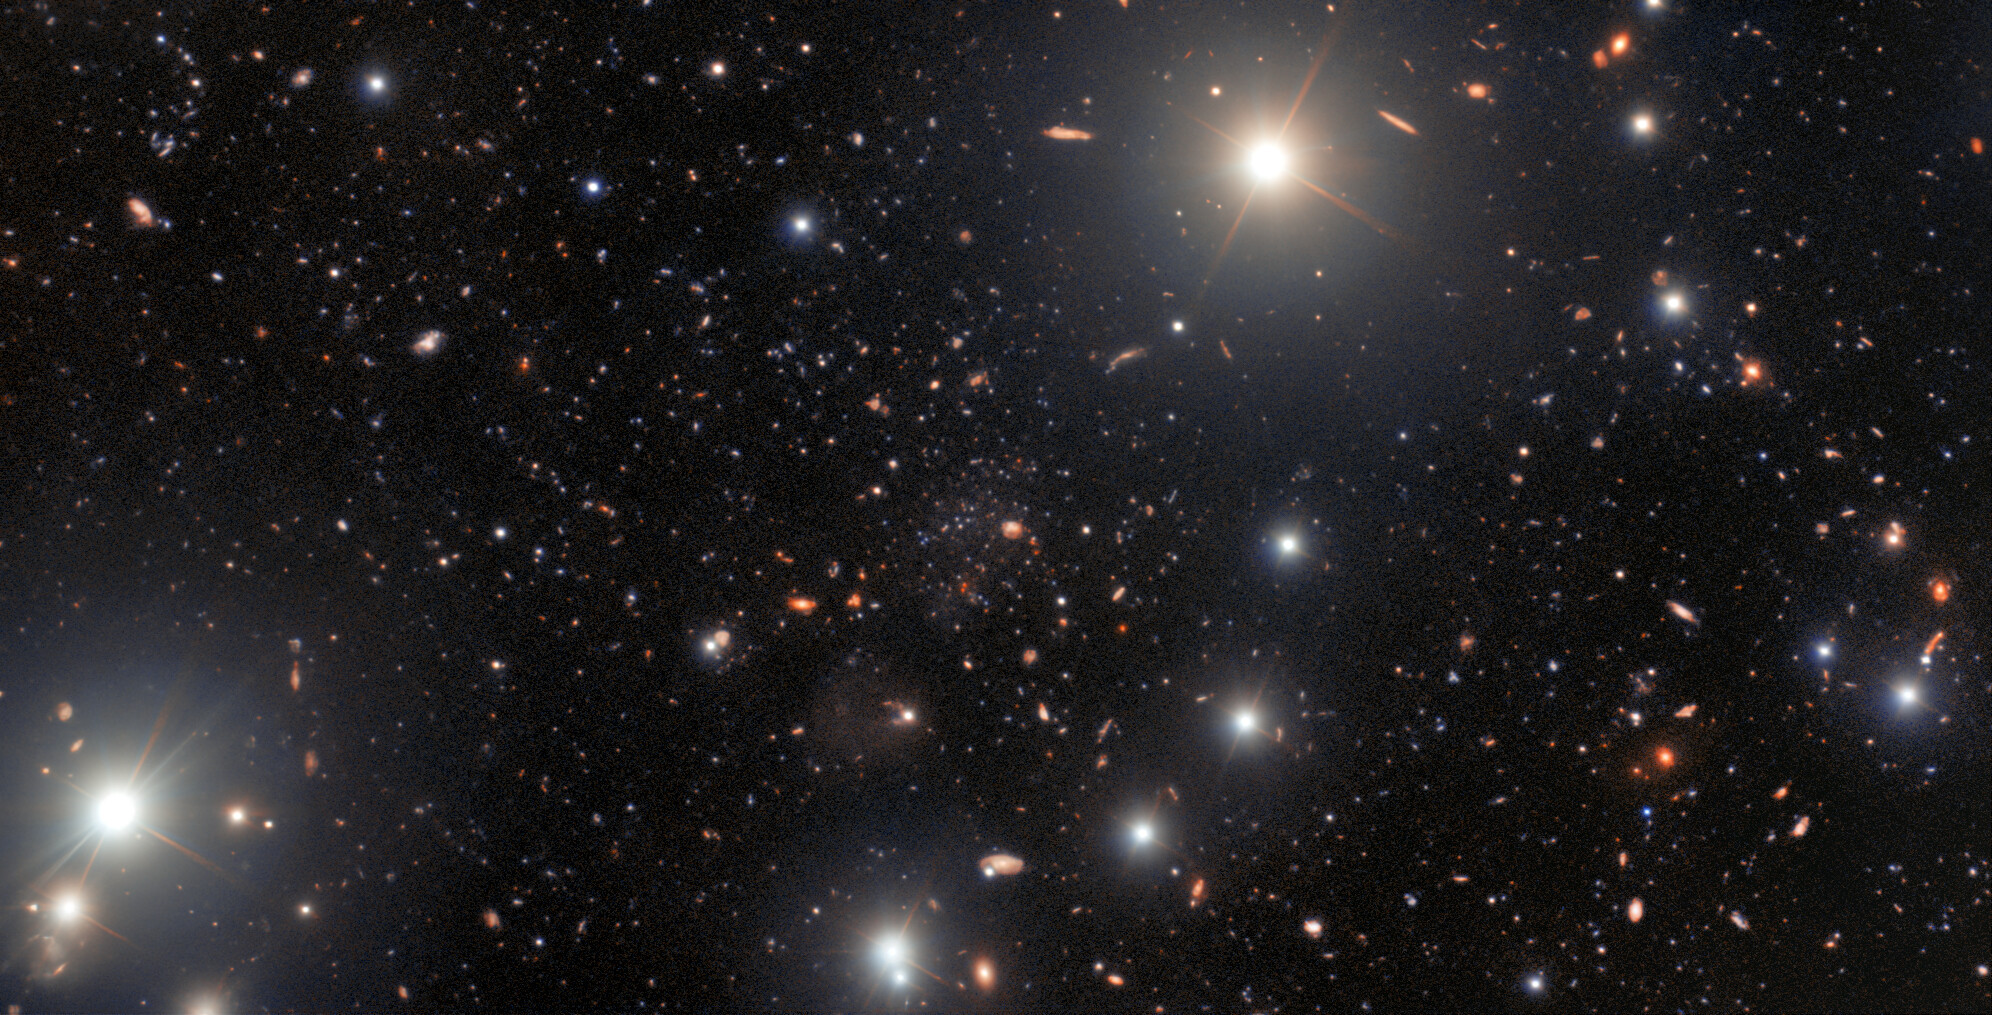 Newswise: Gemini North Spies Ultra-Faint Fossil Galaxy Discovered on Outskirts of Andromeda